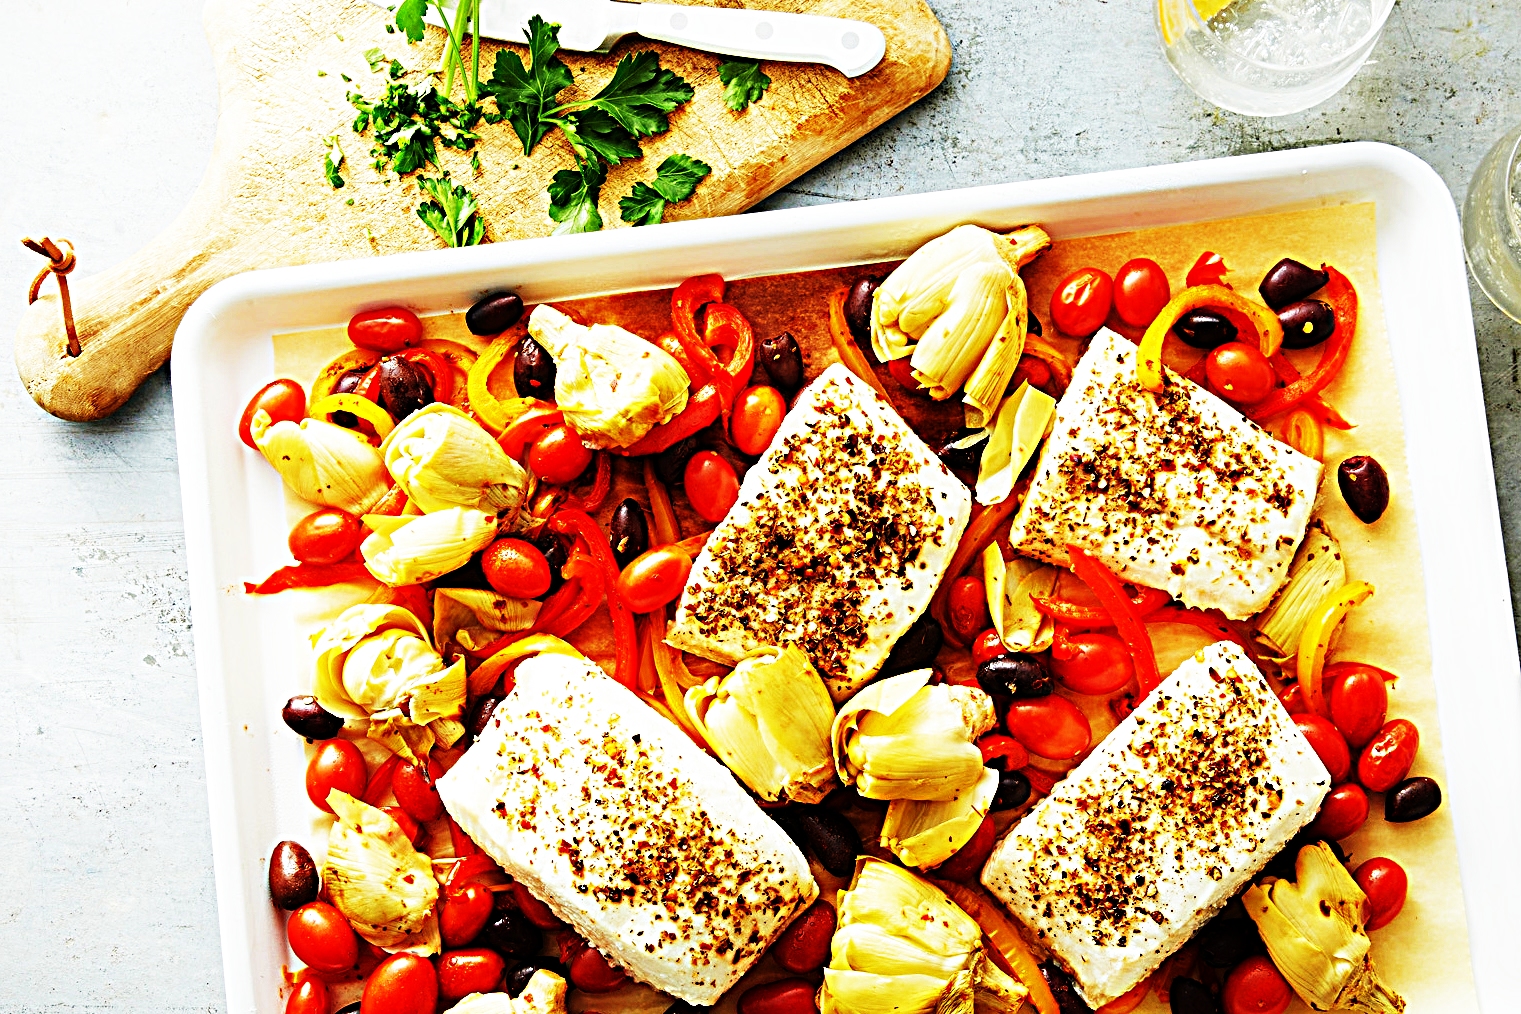 Stupid-Easy Recipe for Sheet-Pan Halibut with Mediterranean Vegetables (#1 Top-Rated)